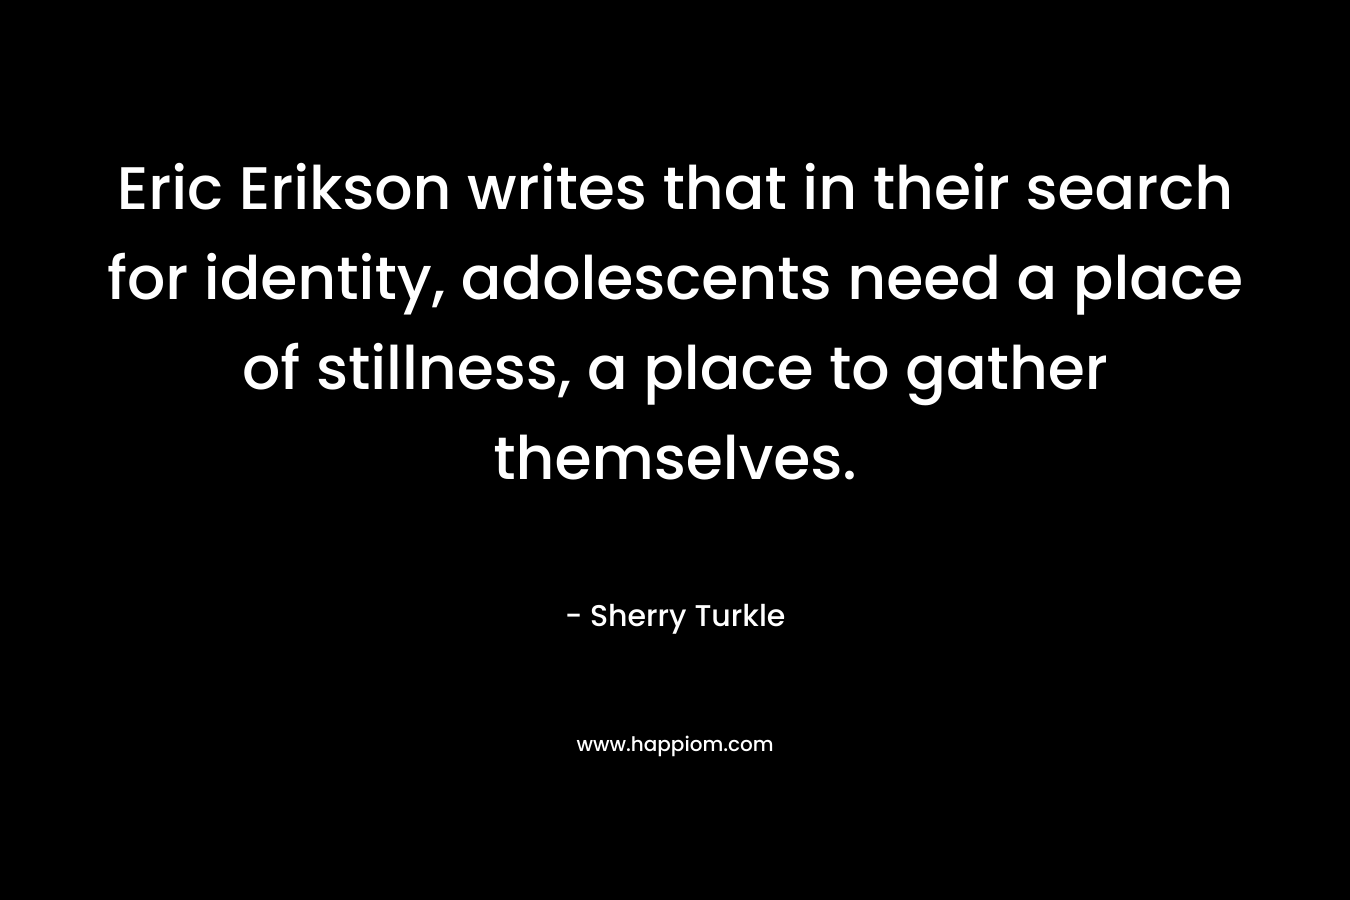 Eric Erikson writes that in their search for identity, adolescents need a place of stillness, a place to gather themselves. – Sherry Turkle